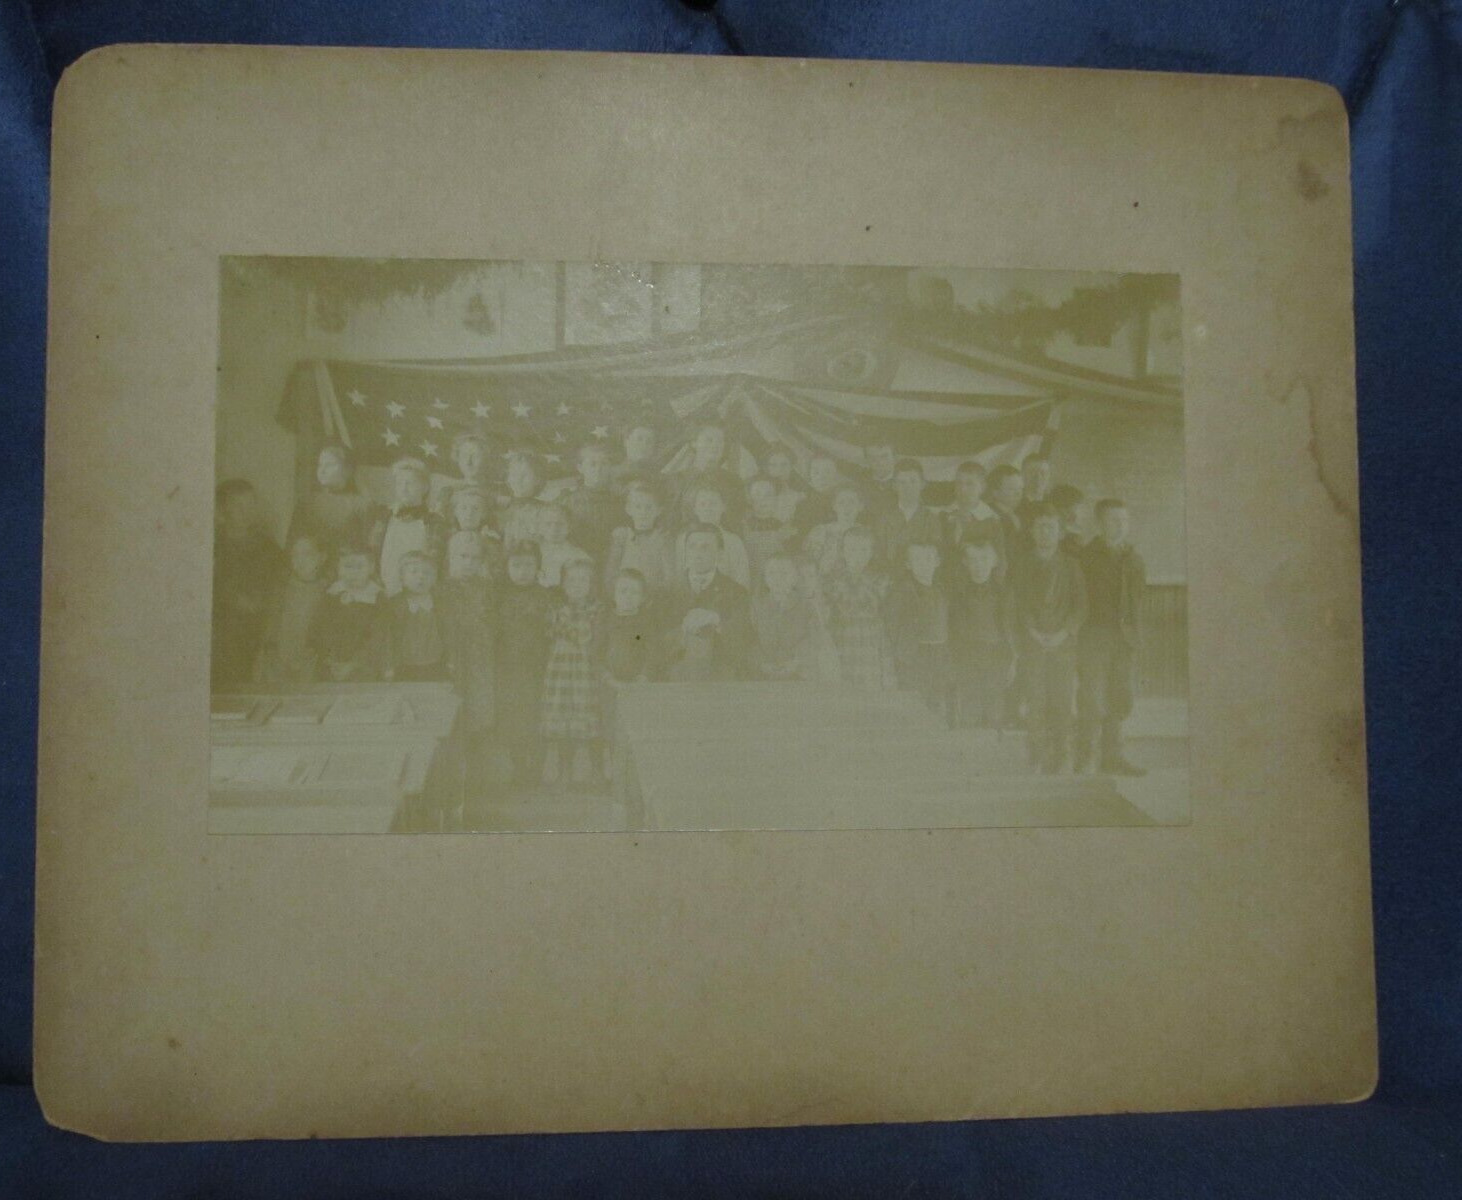 EARLY 1900s Cabinet Card FOUNTAINDALE ELEMENTARY SCHOOL Hagerstown MD Smithsburg